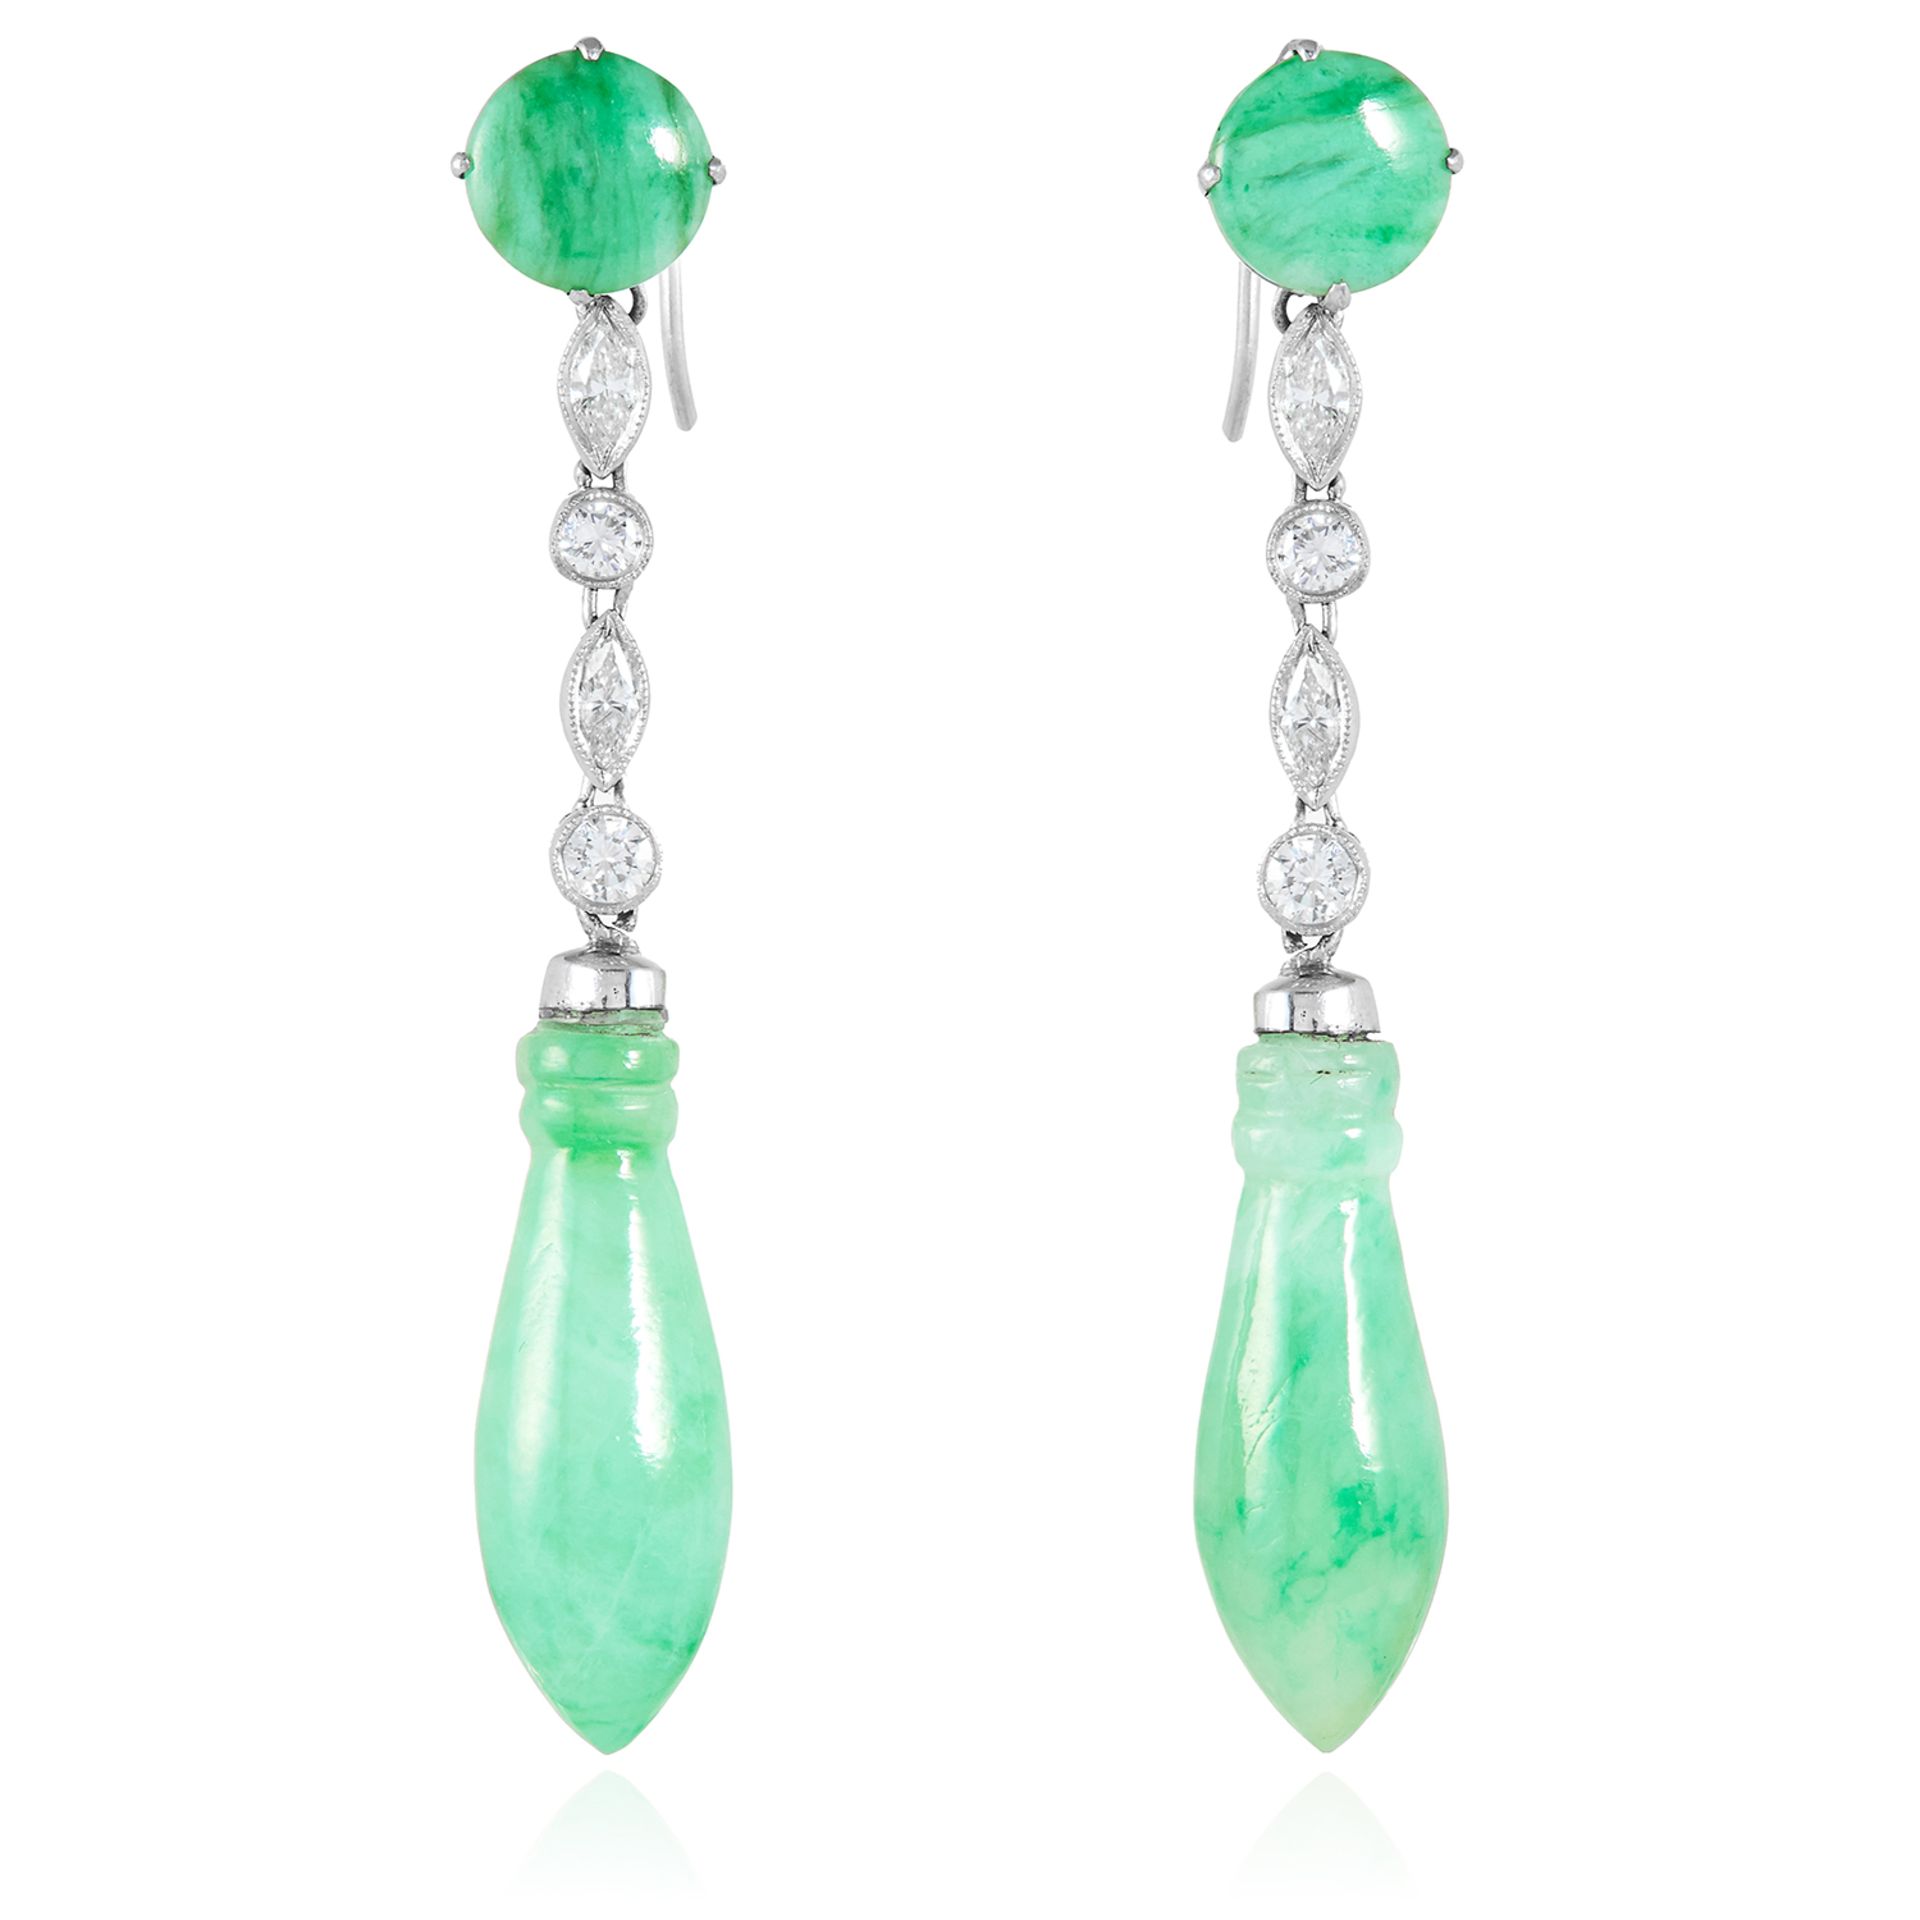 A PAIR OF DIAMOND AND JADEITE JADE EARRINGS in white gold or platinum, set with round and marquise